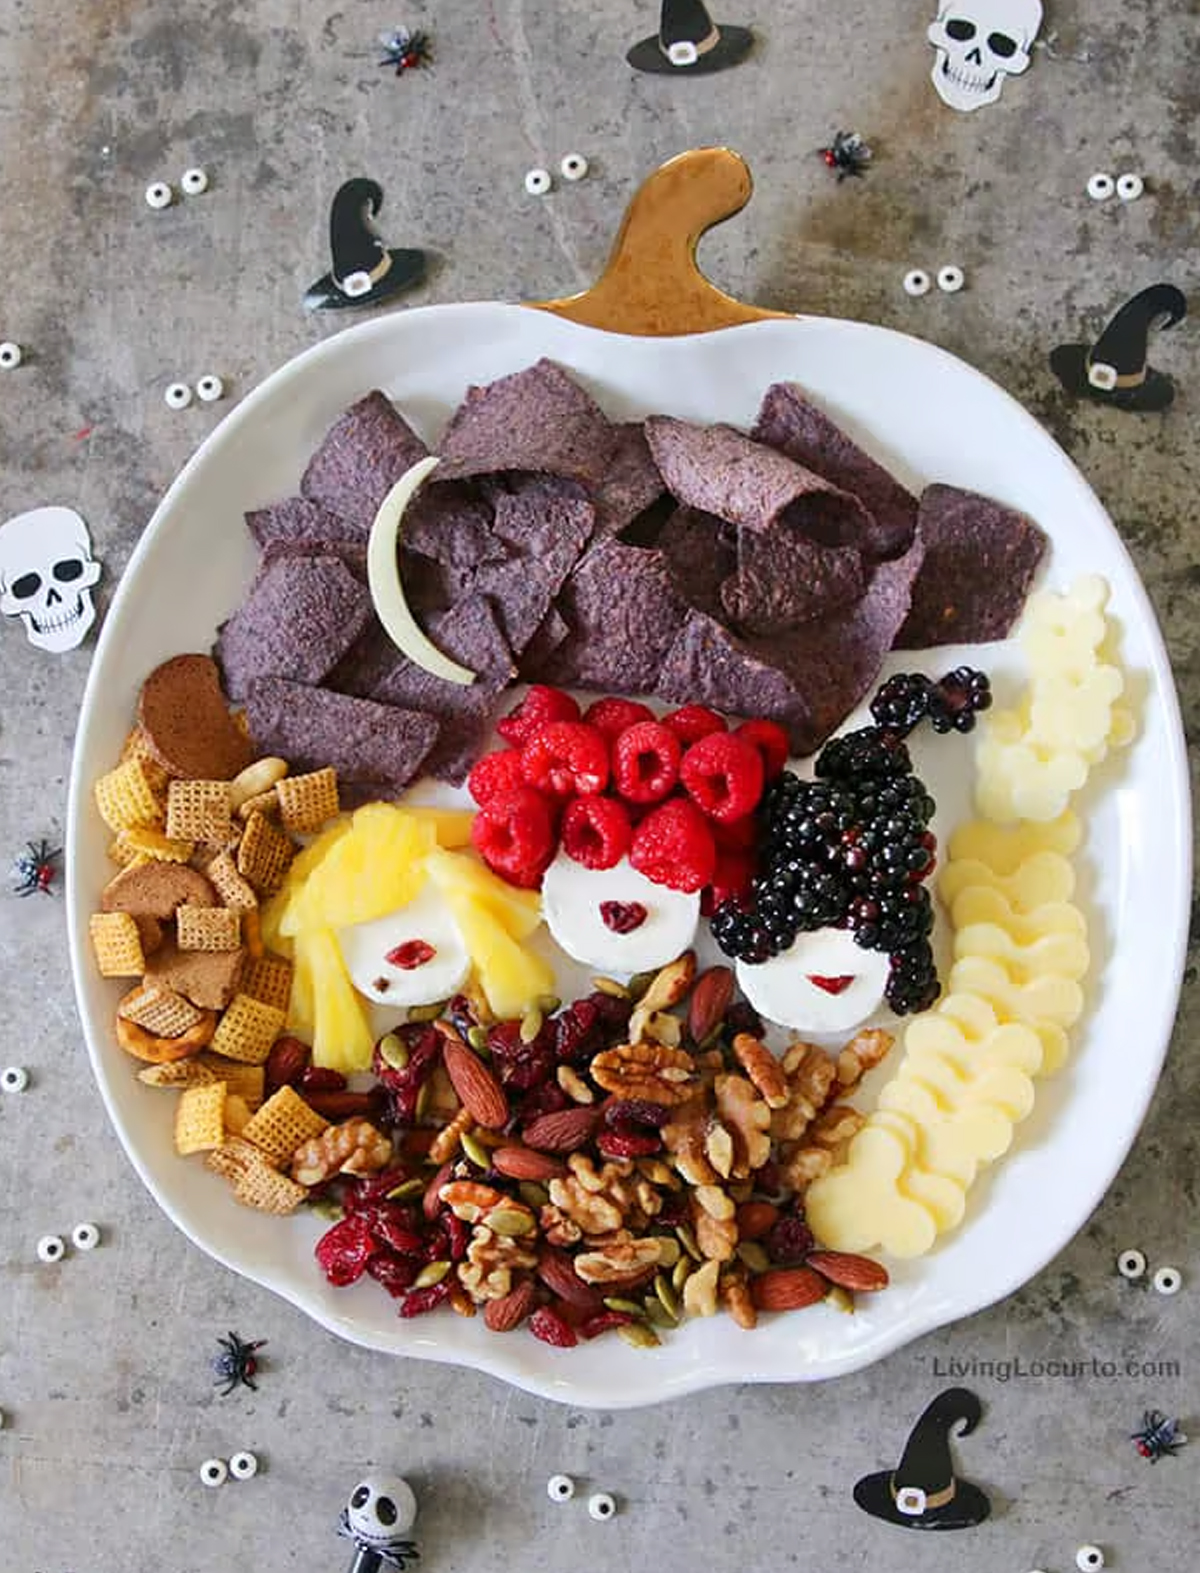 Living Locurto's Halloween board is filled with chips, berries, cheese, nuts, and chex mix.